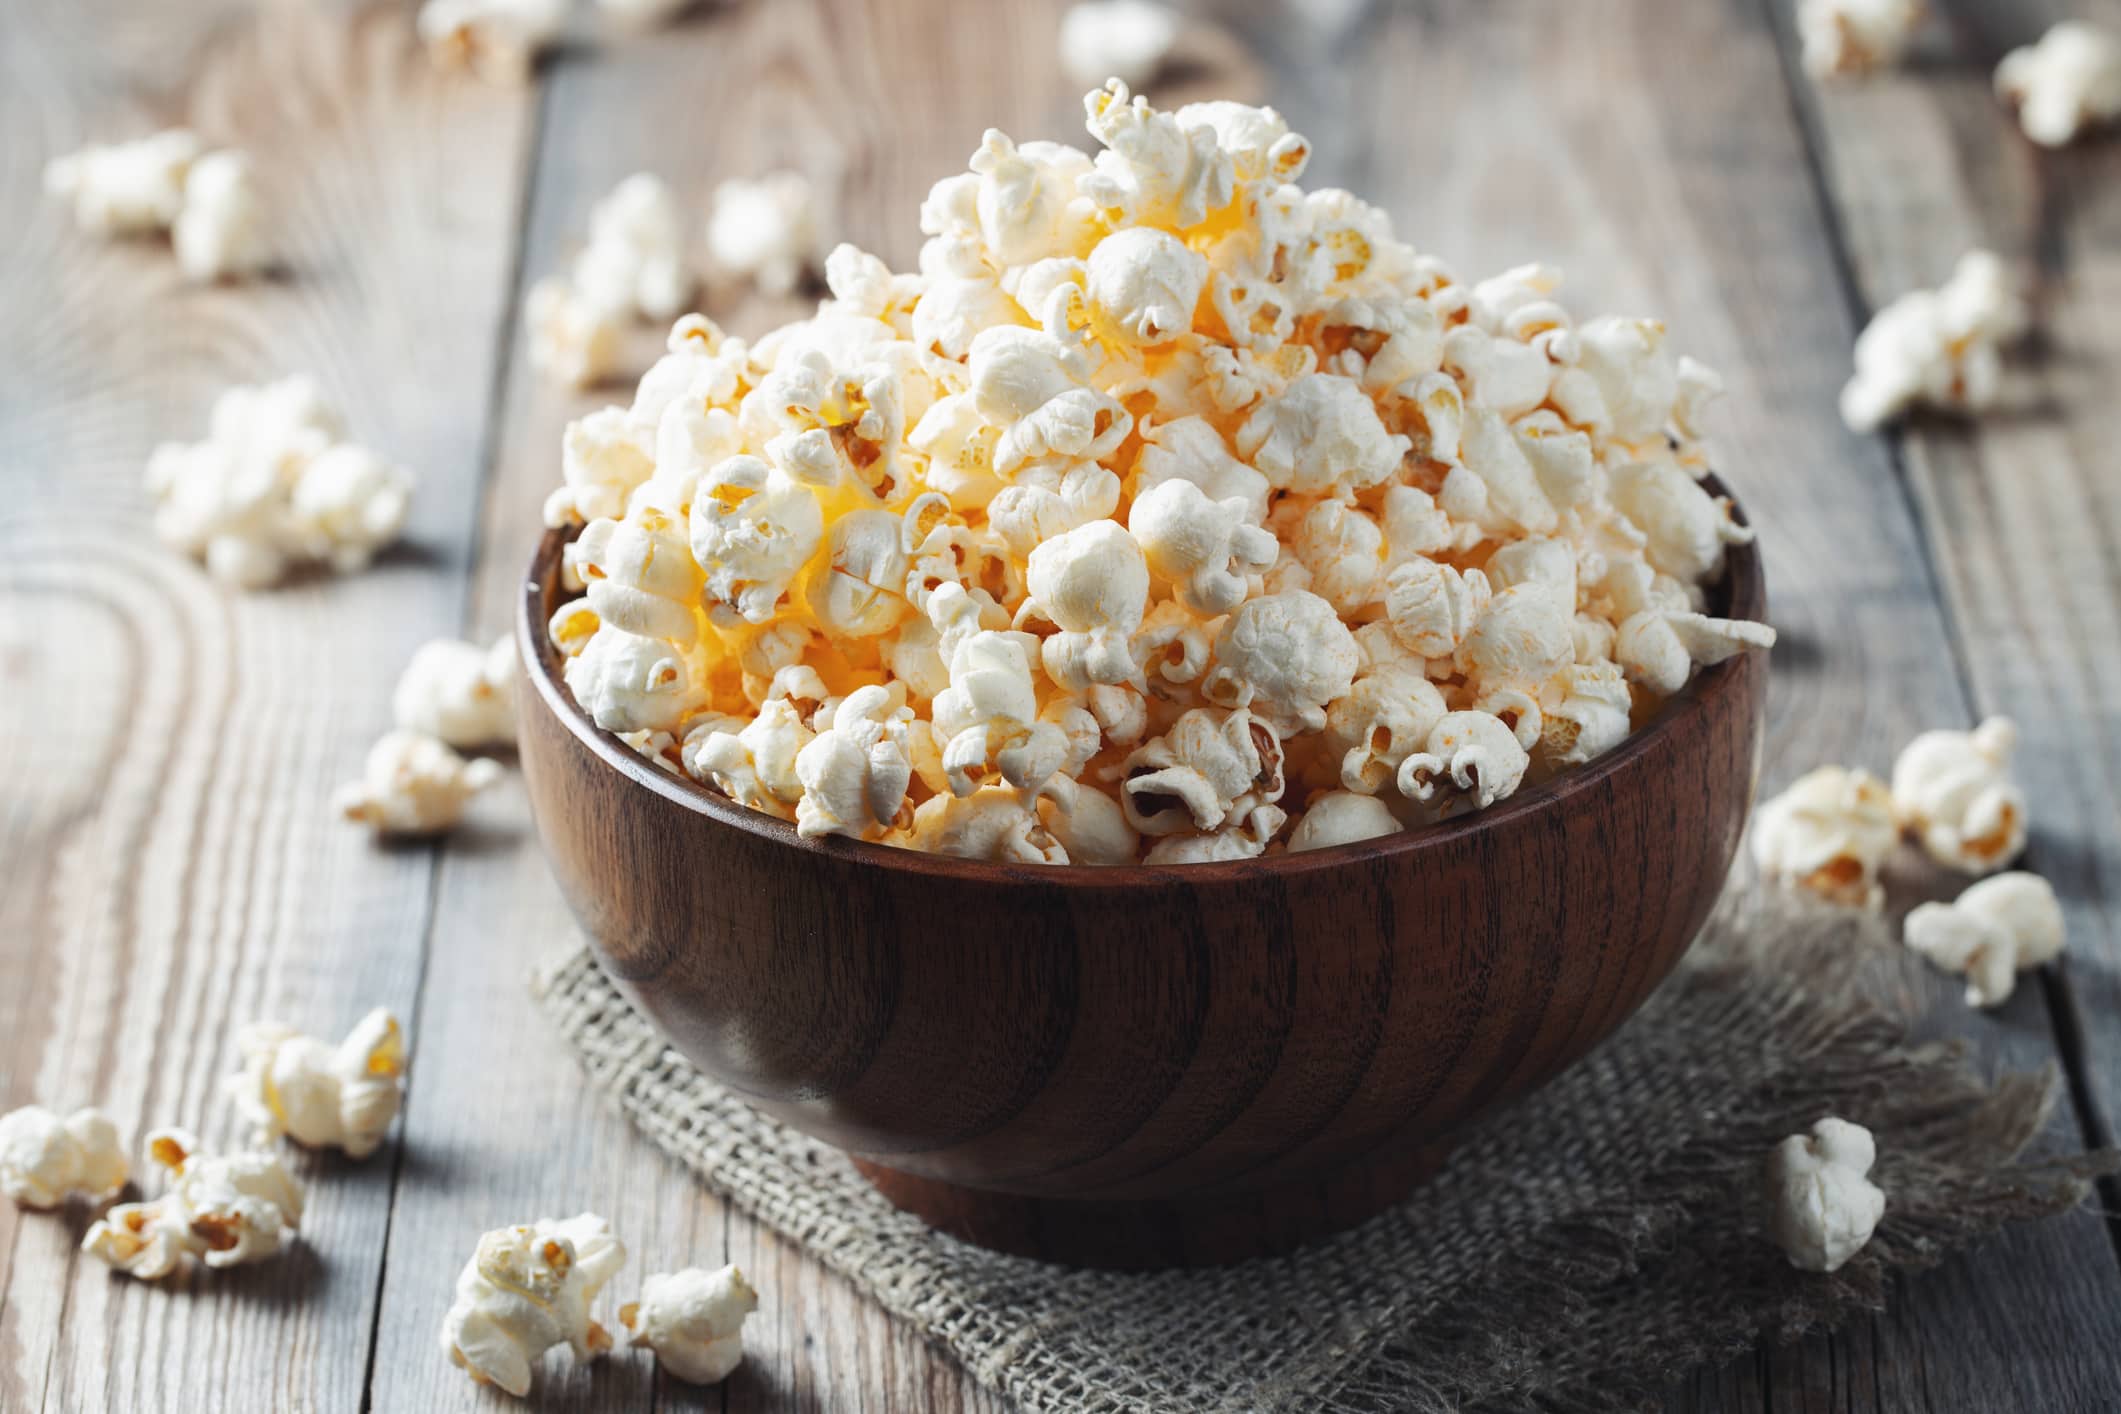 A wooden bowl of salted popcorn at the old wooden table. Dark background.